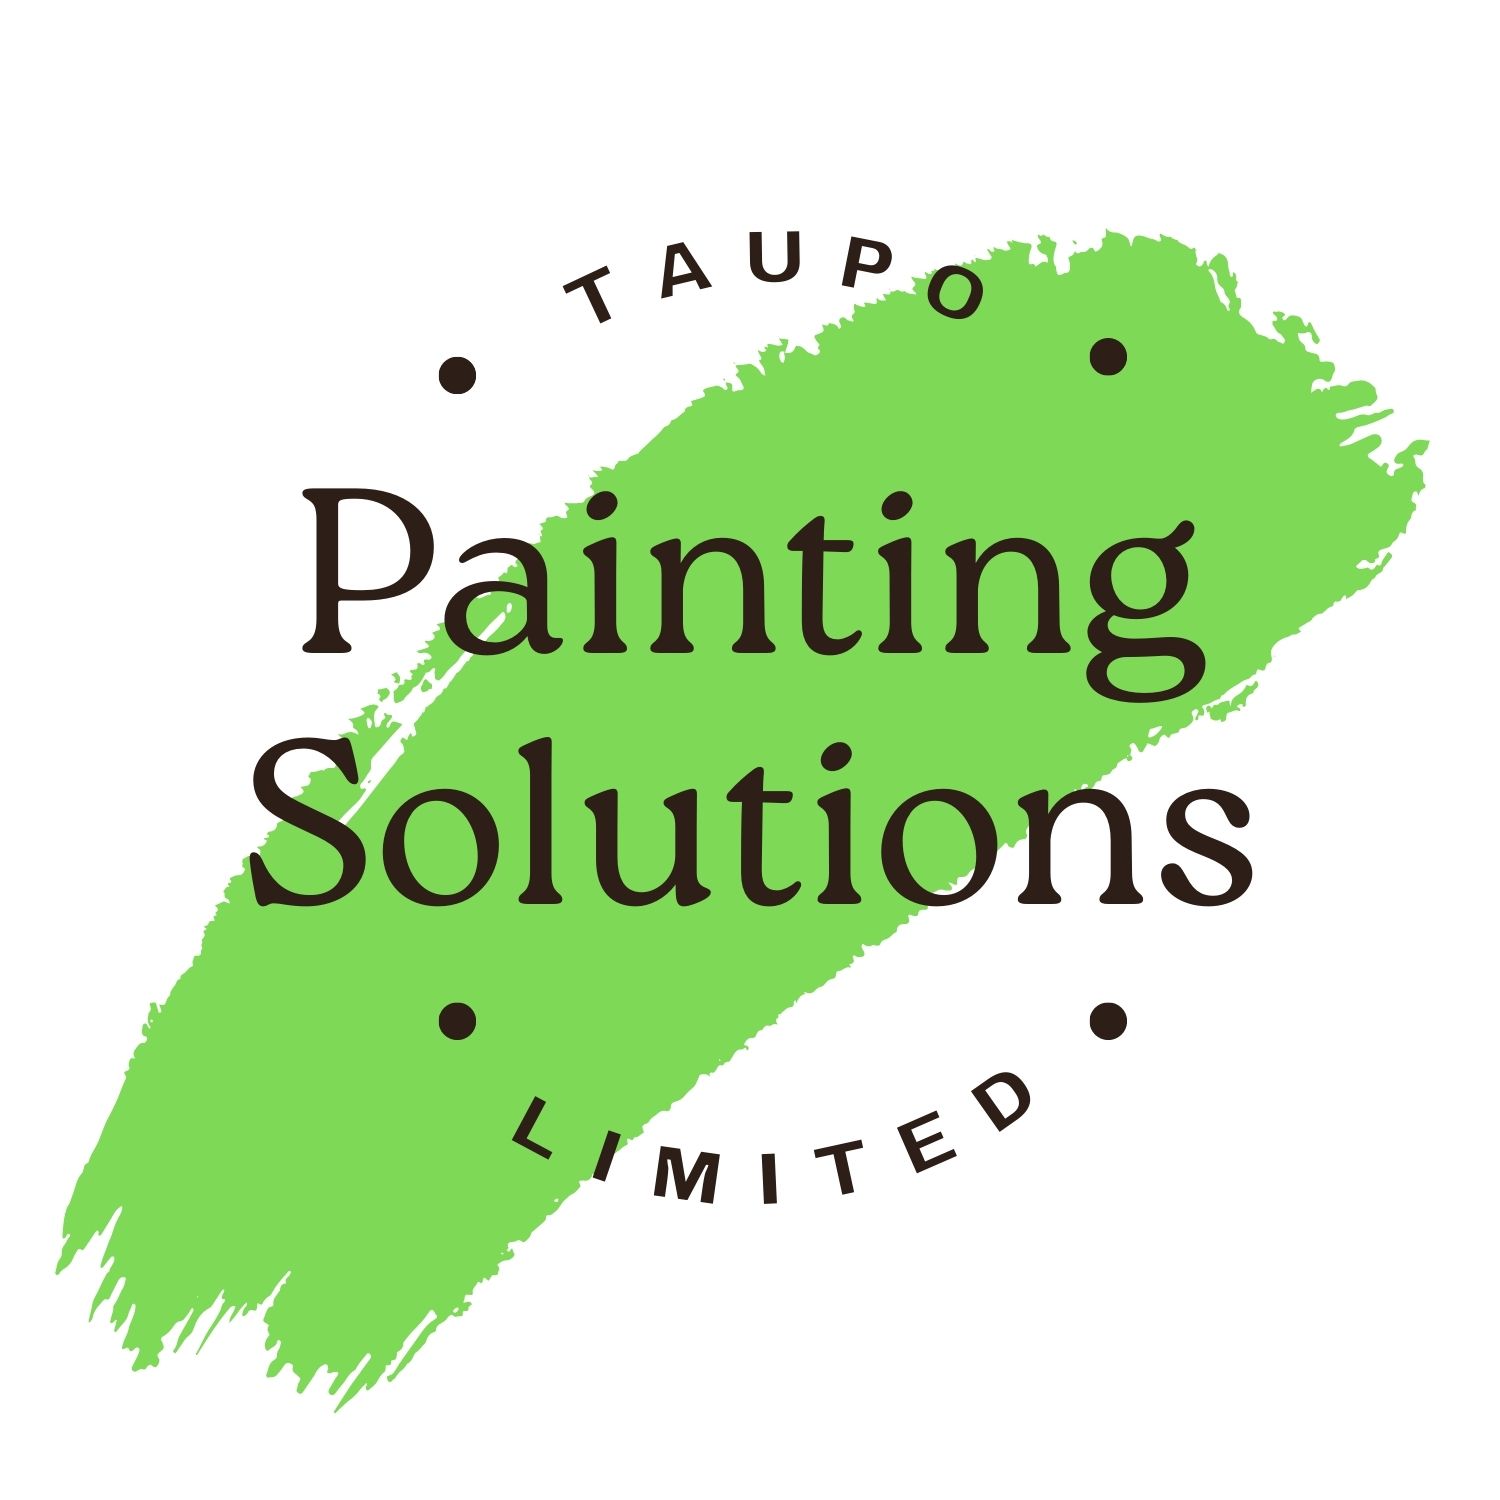 Taupo Painting Solutions